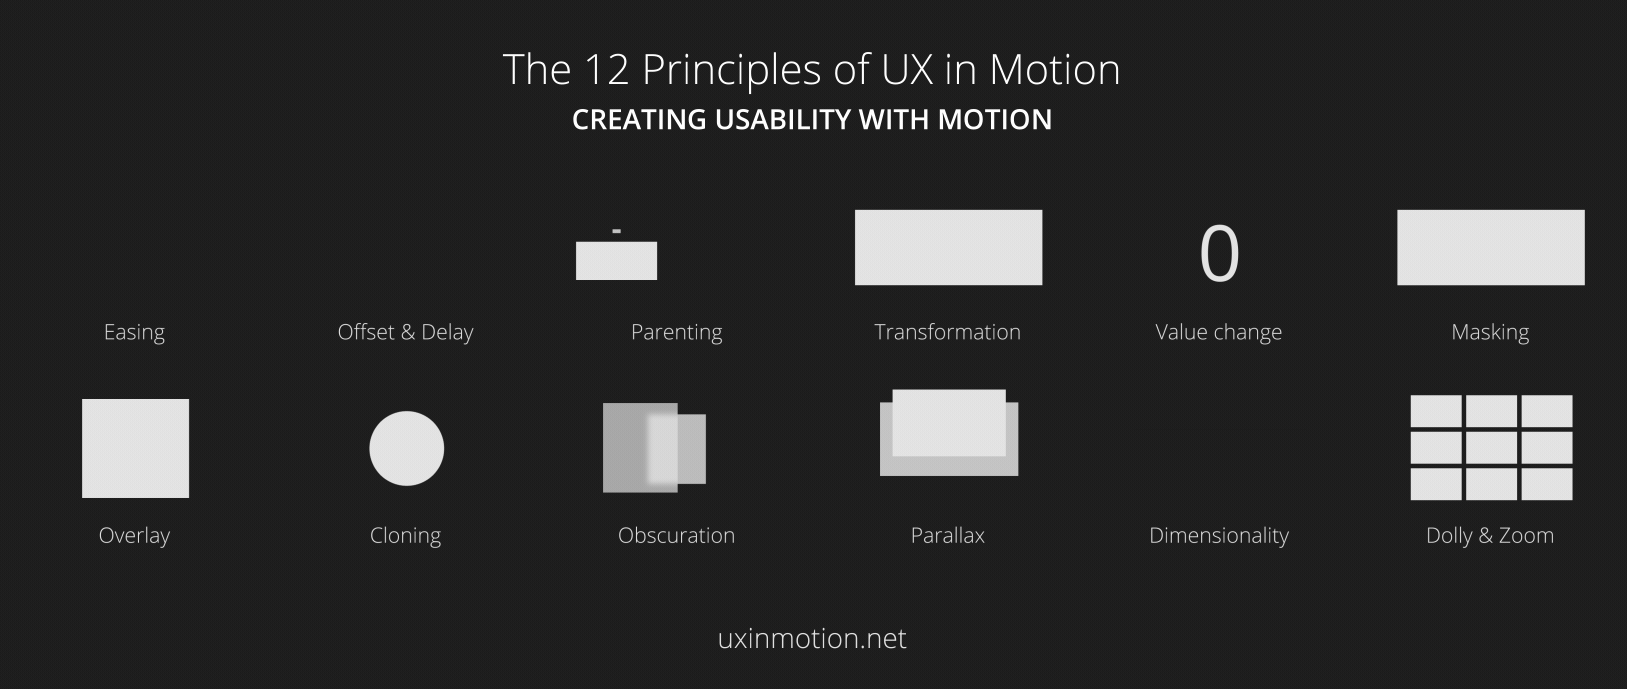 Creating Usability with Motion: The UX in Motion Manifesto, by Issara  Willenskomer, UX in Motion